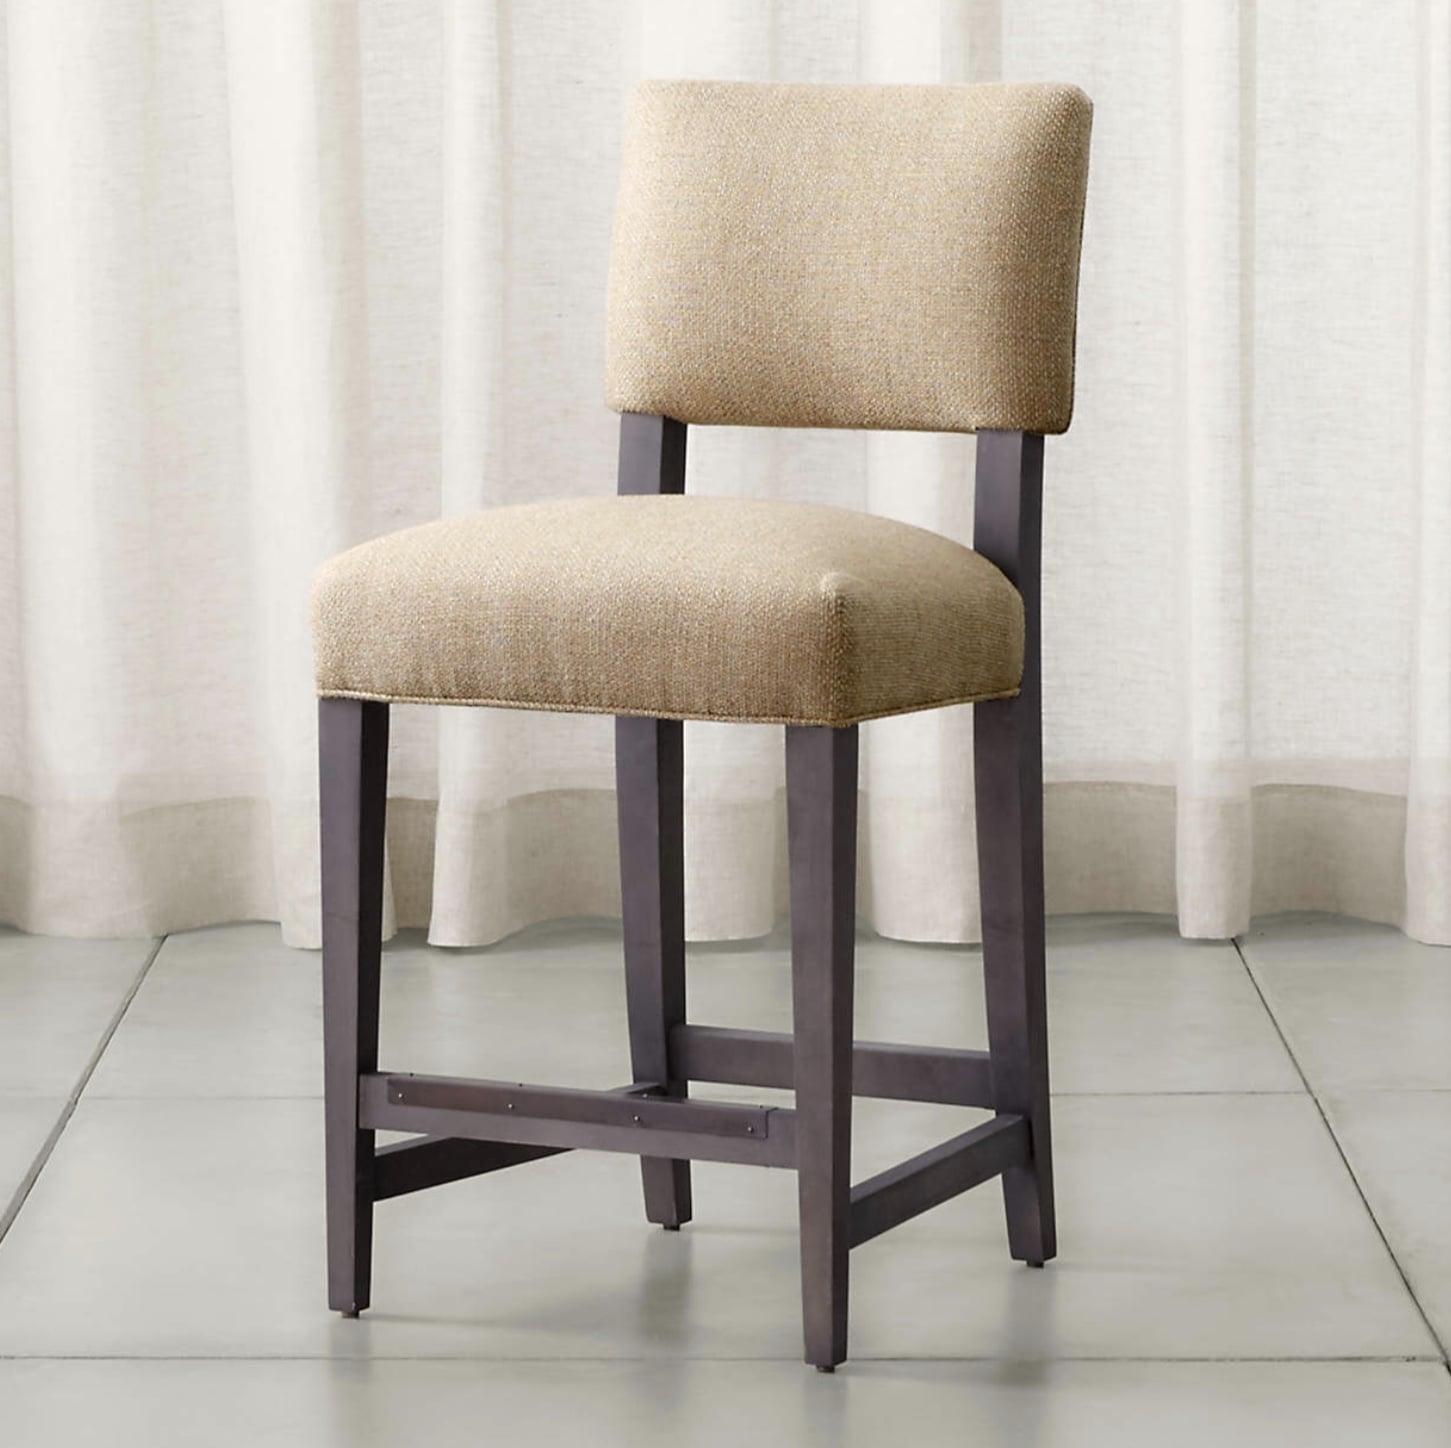 Made to Order Bar Stools Furniture. - BST 059-01